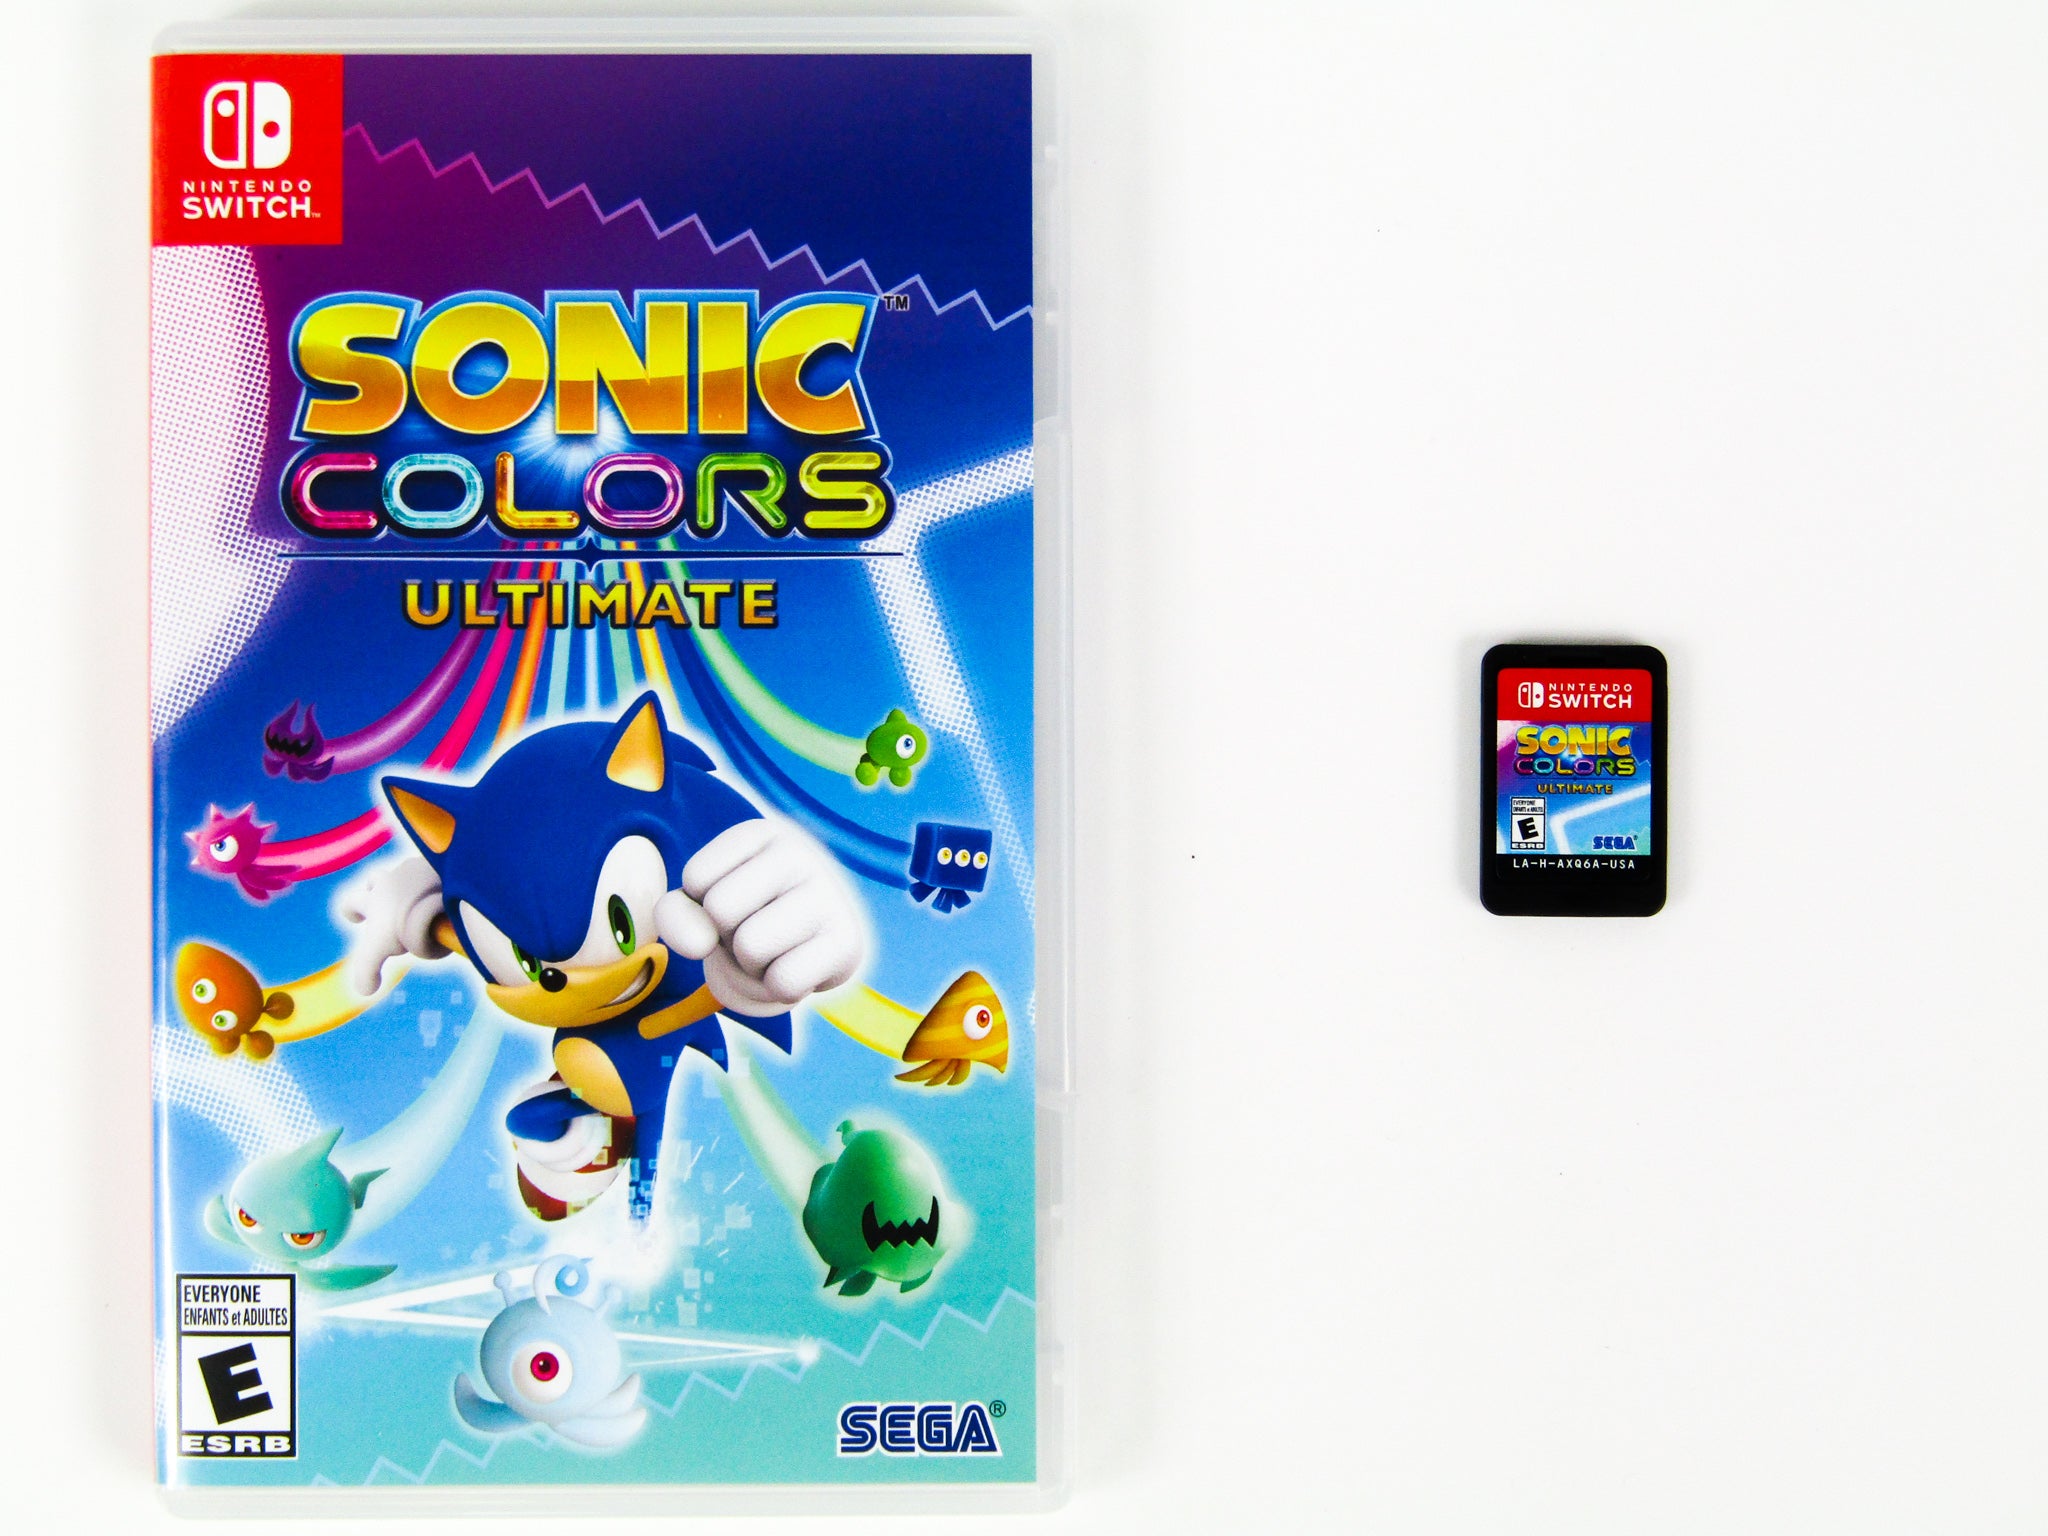 Sonic Colors Ultimate (Launch Edition) - Nintendo Switch – Retro Raven Games